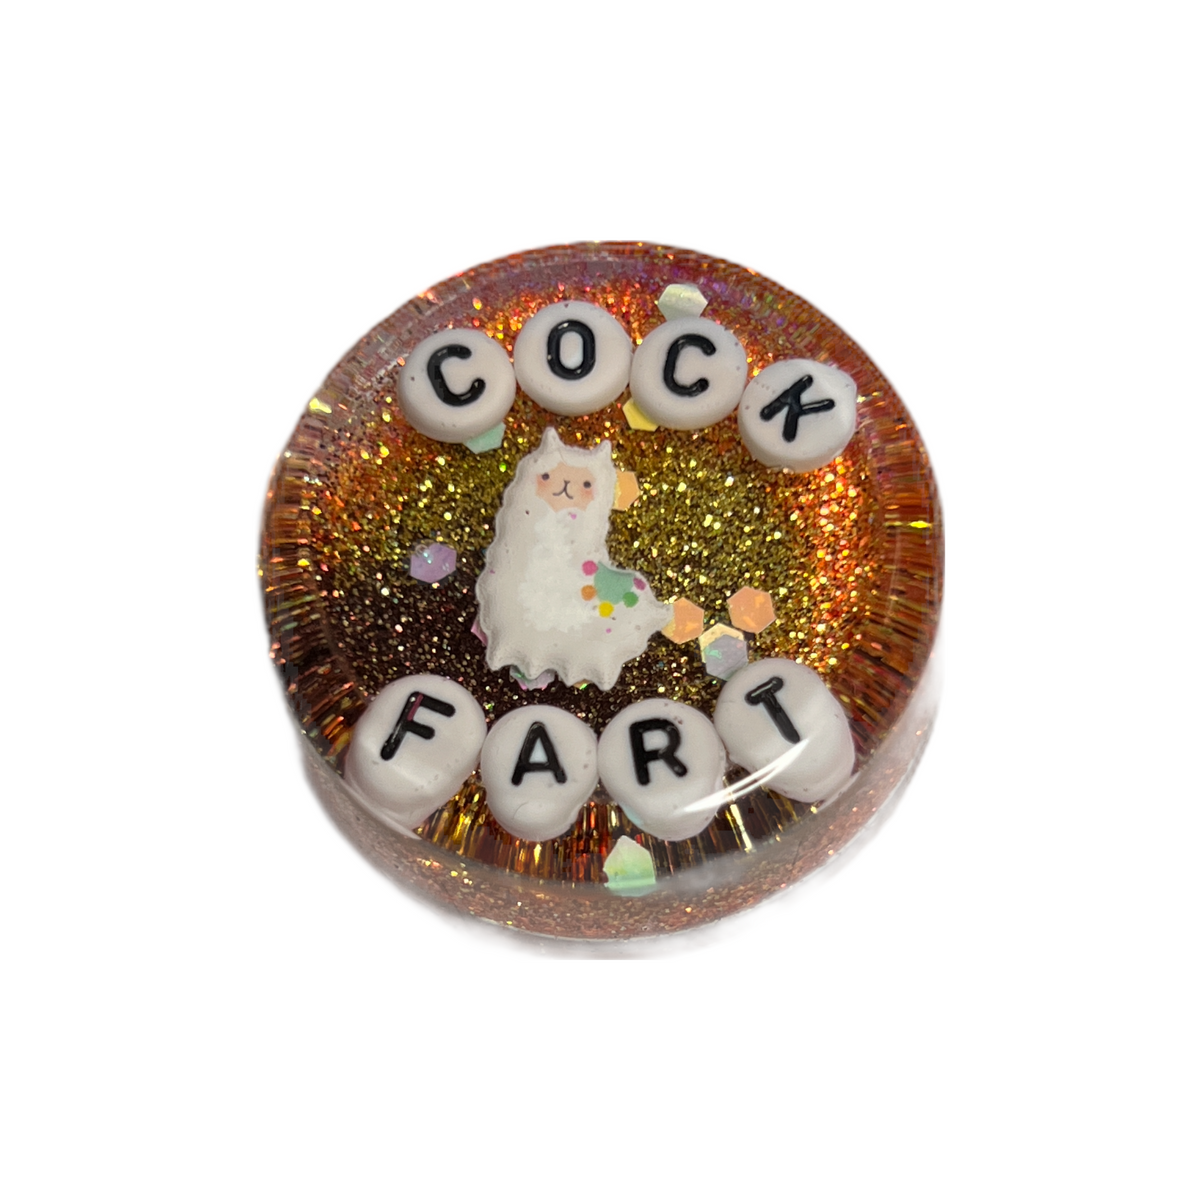 Cock Fart - Shower Art - READY TO SHIP